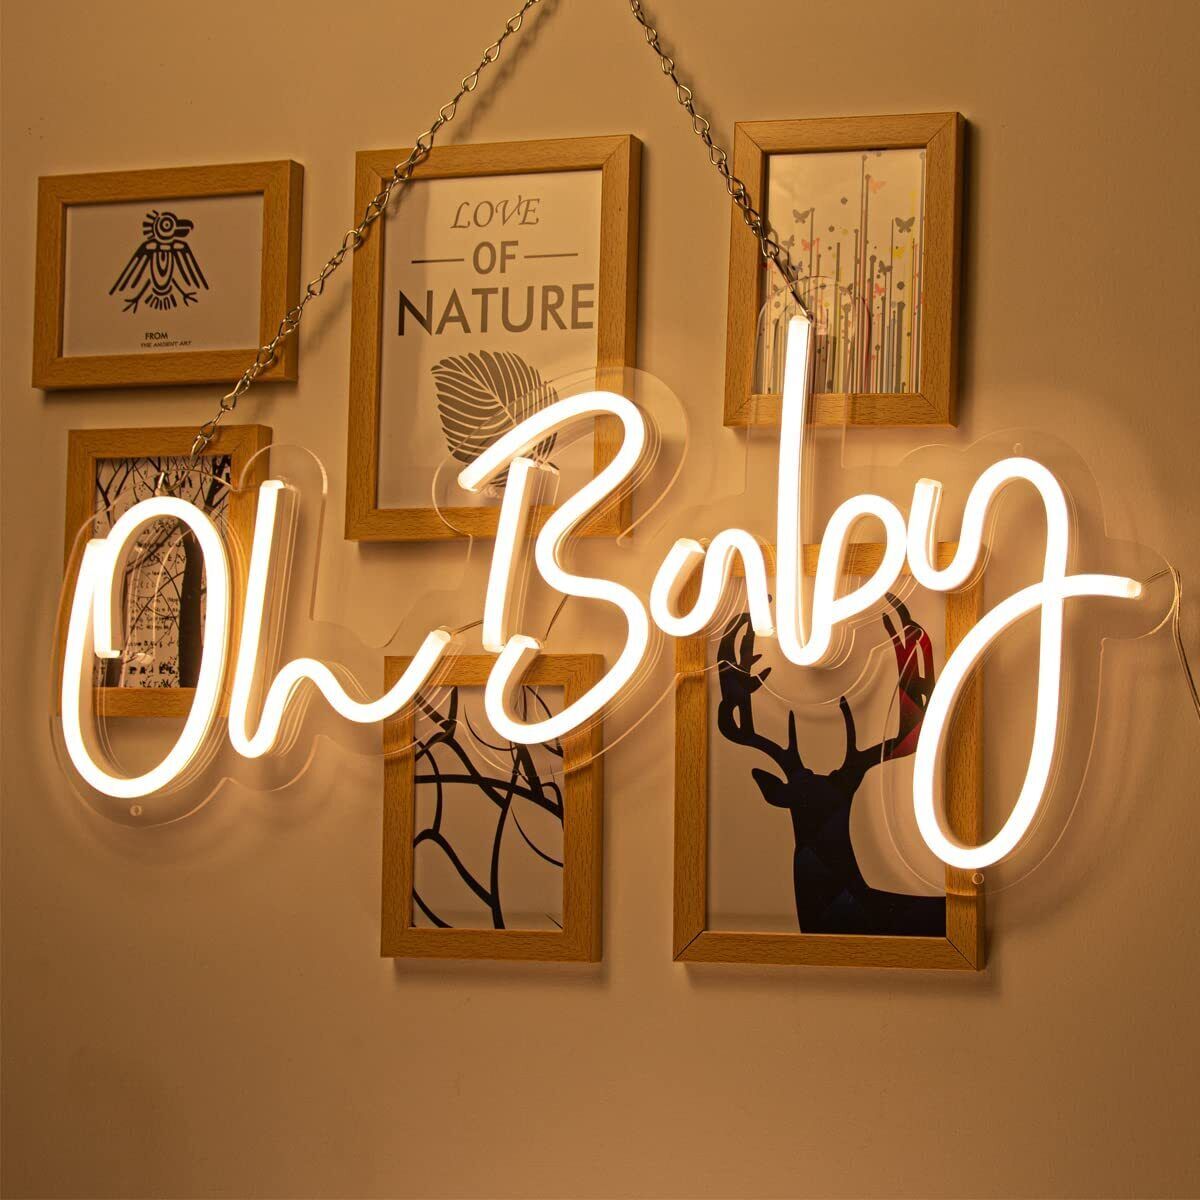 Reusable Oh Baby LED Neon Sign Light for Party Wall Decor 23.5X11.8in Warm White